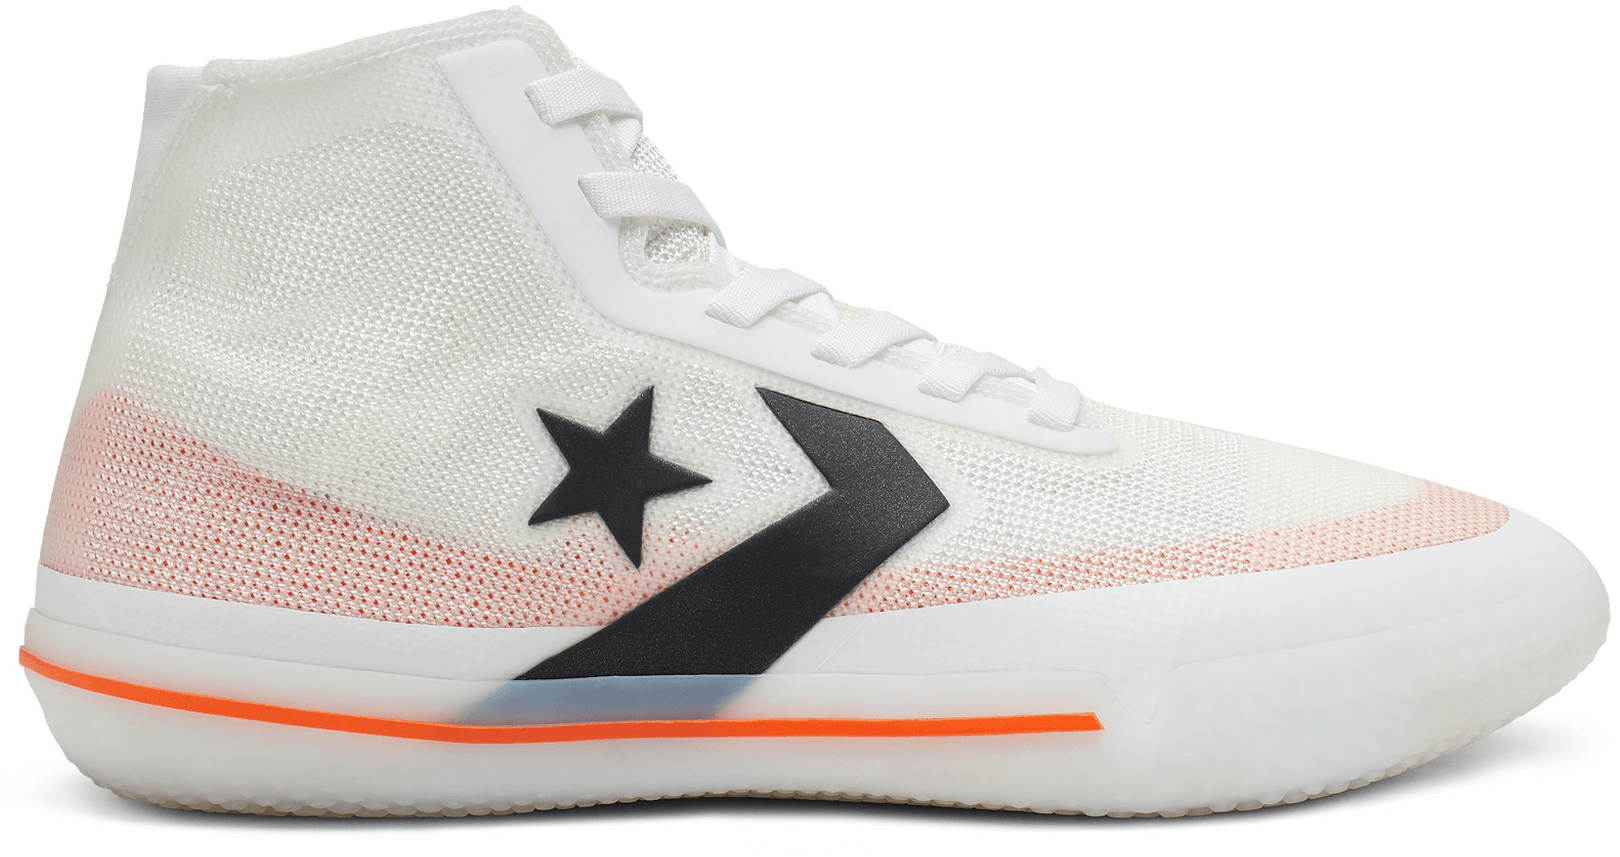 Converse All Star Pro BB Performance Review